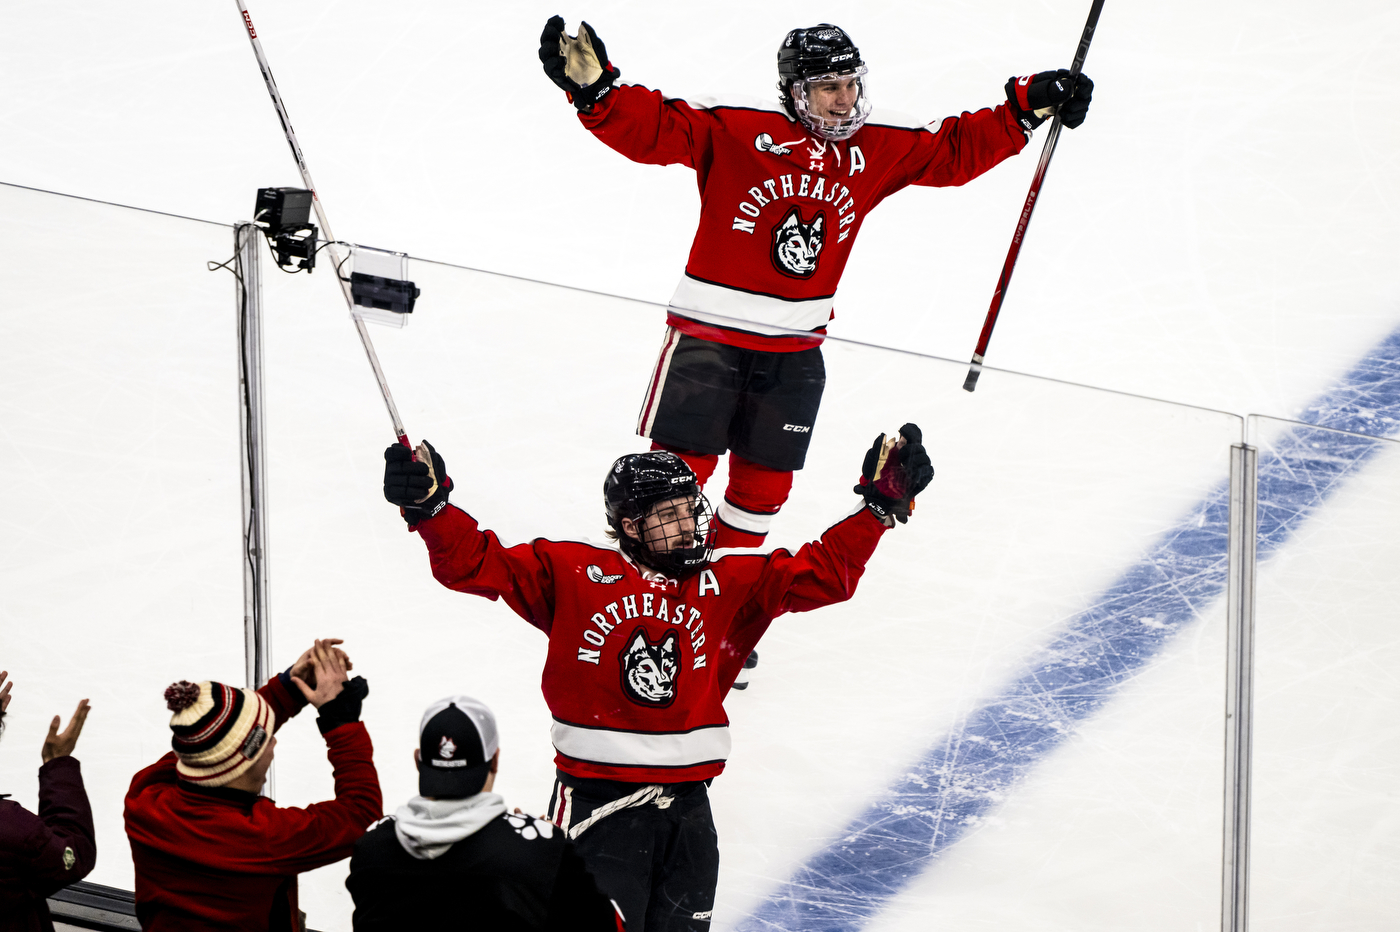 Northeastern hockey players skating towards fans with their arms raised in celebration.